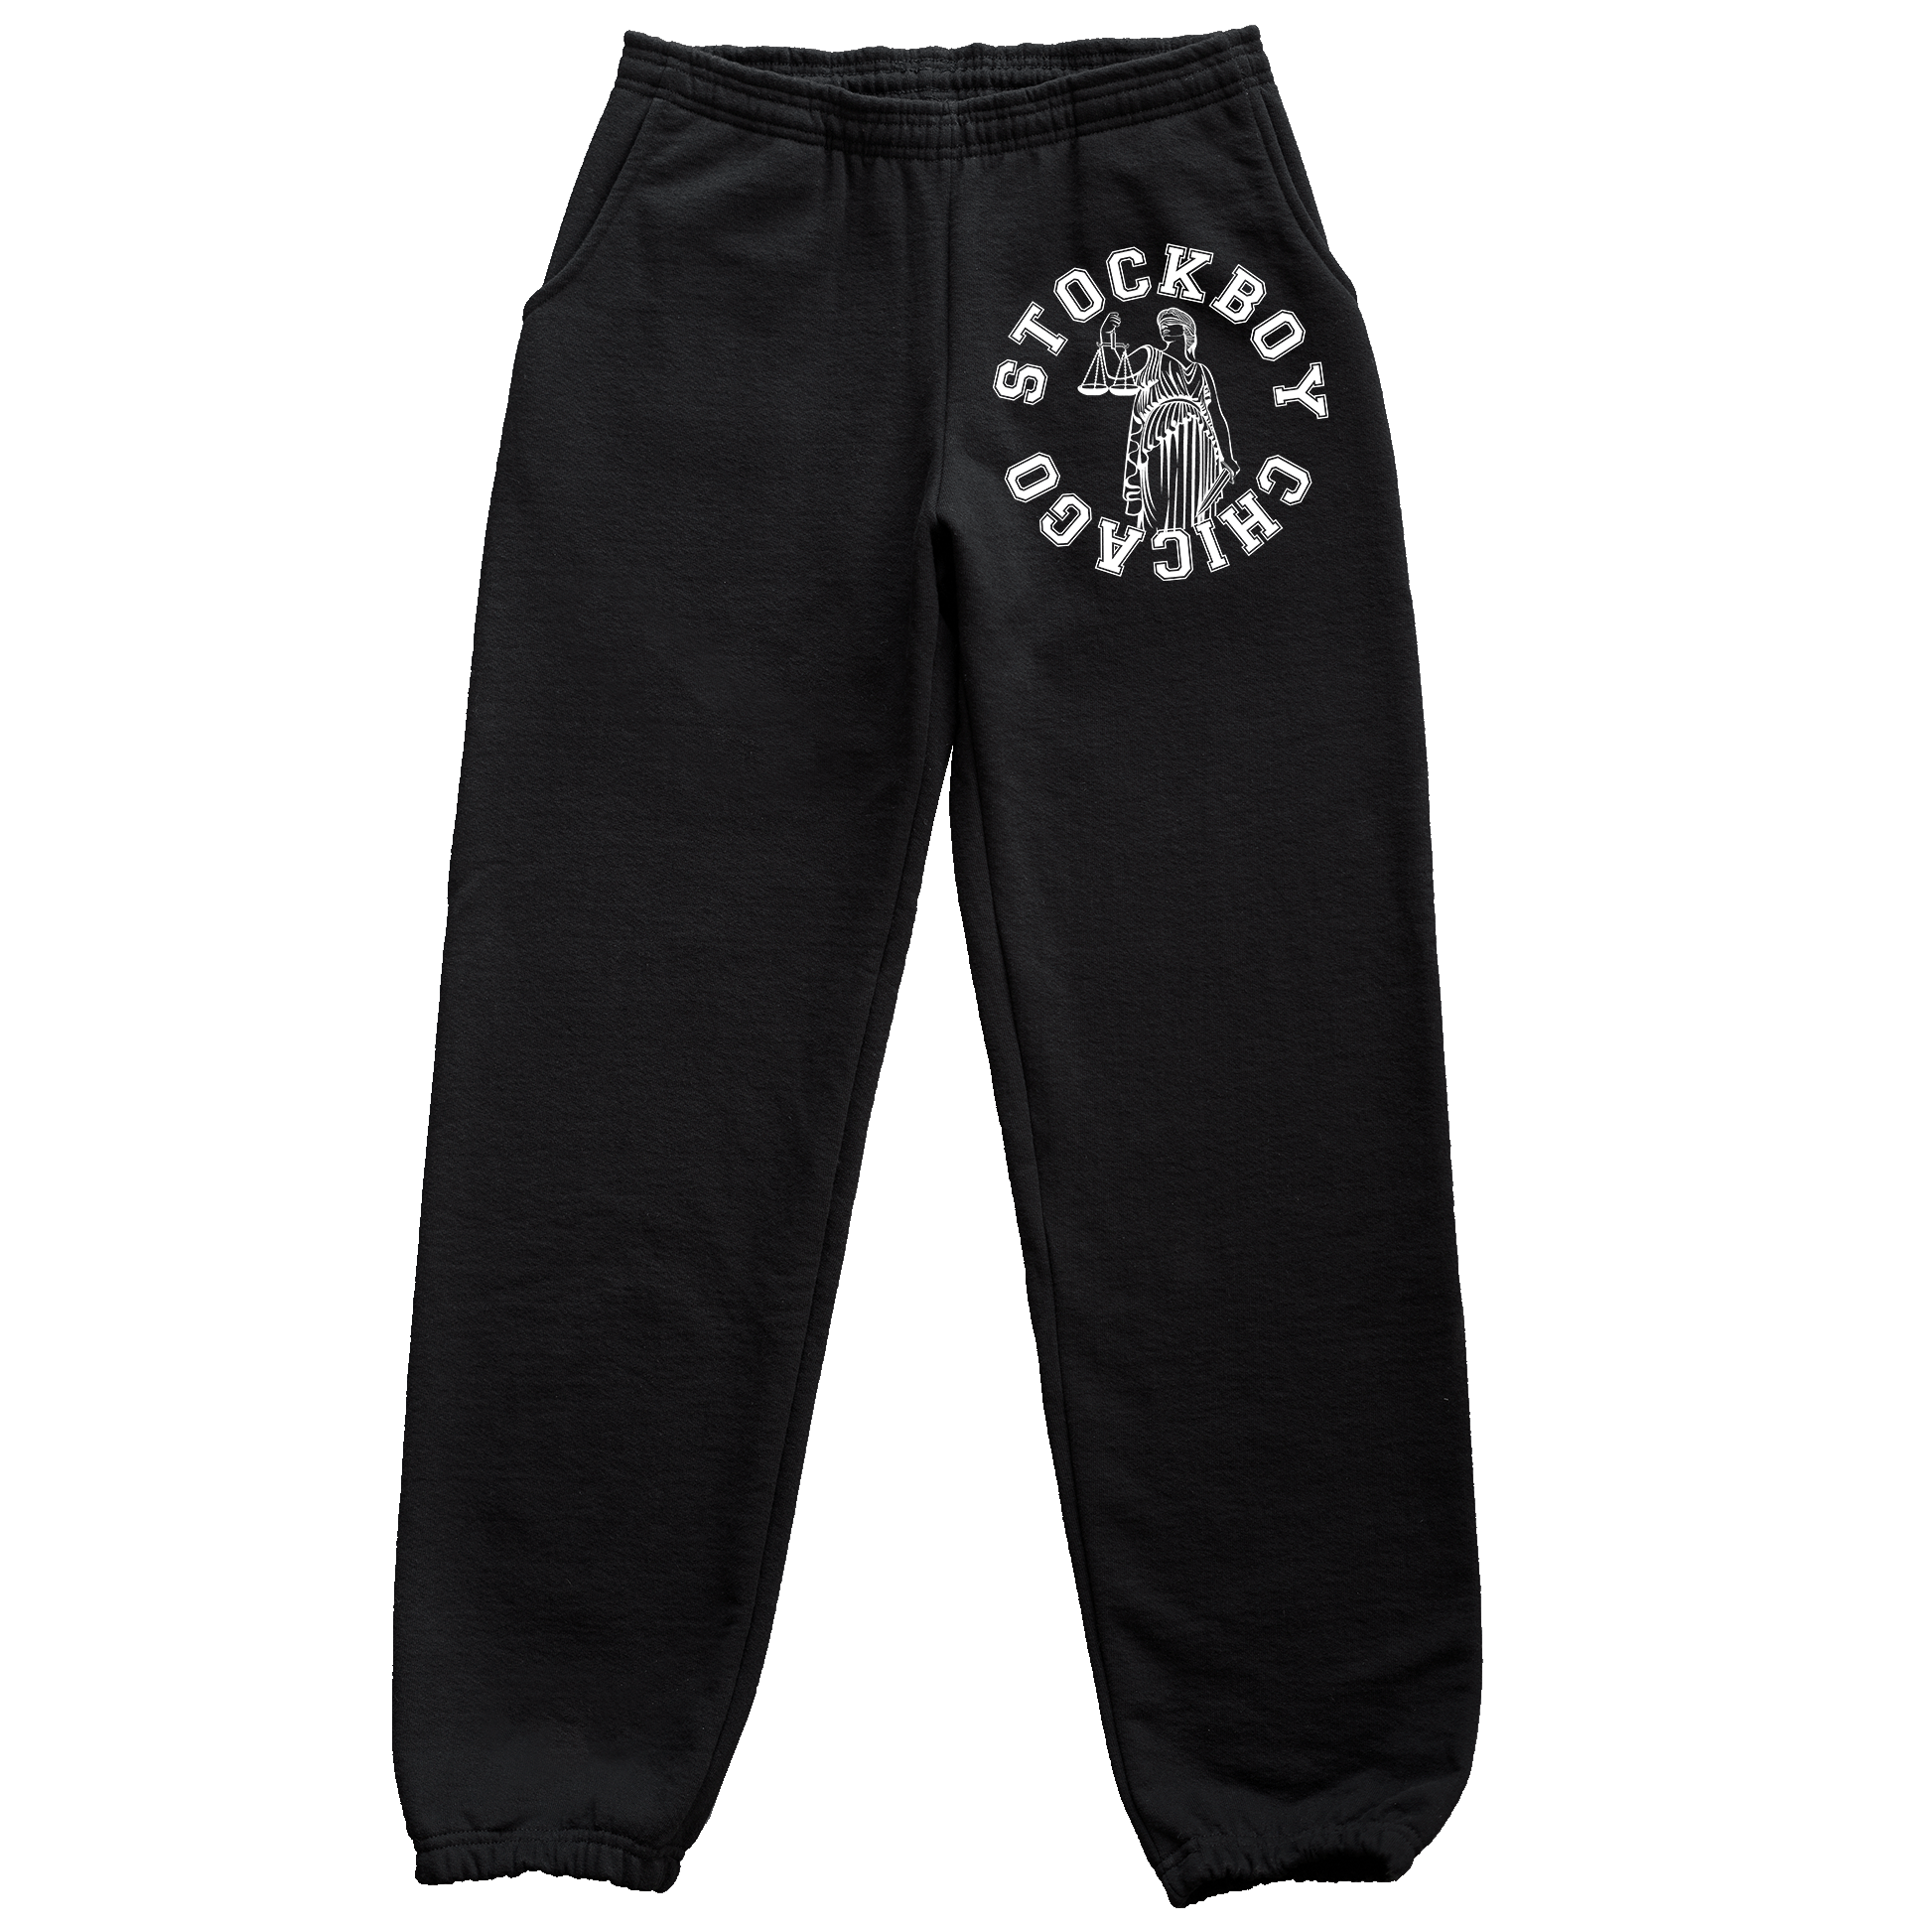 Stock Boy Lady of Justice Joggers (Sold Out)